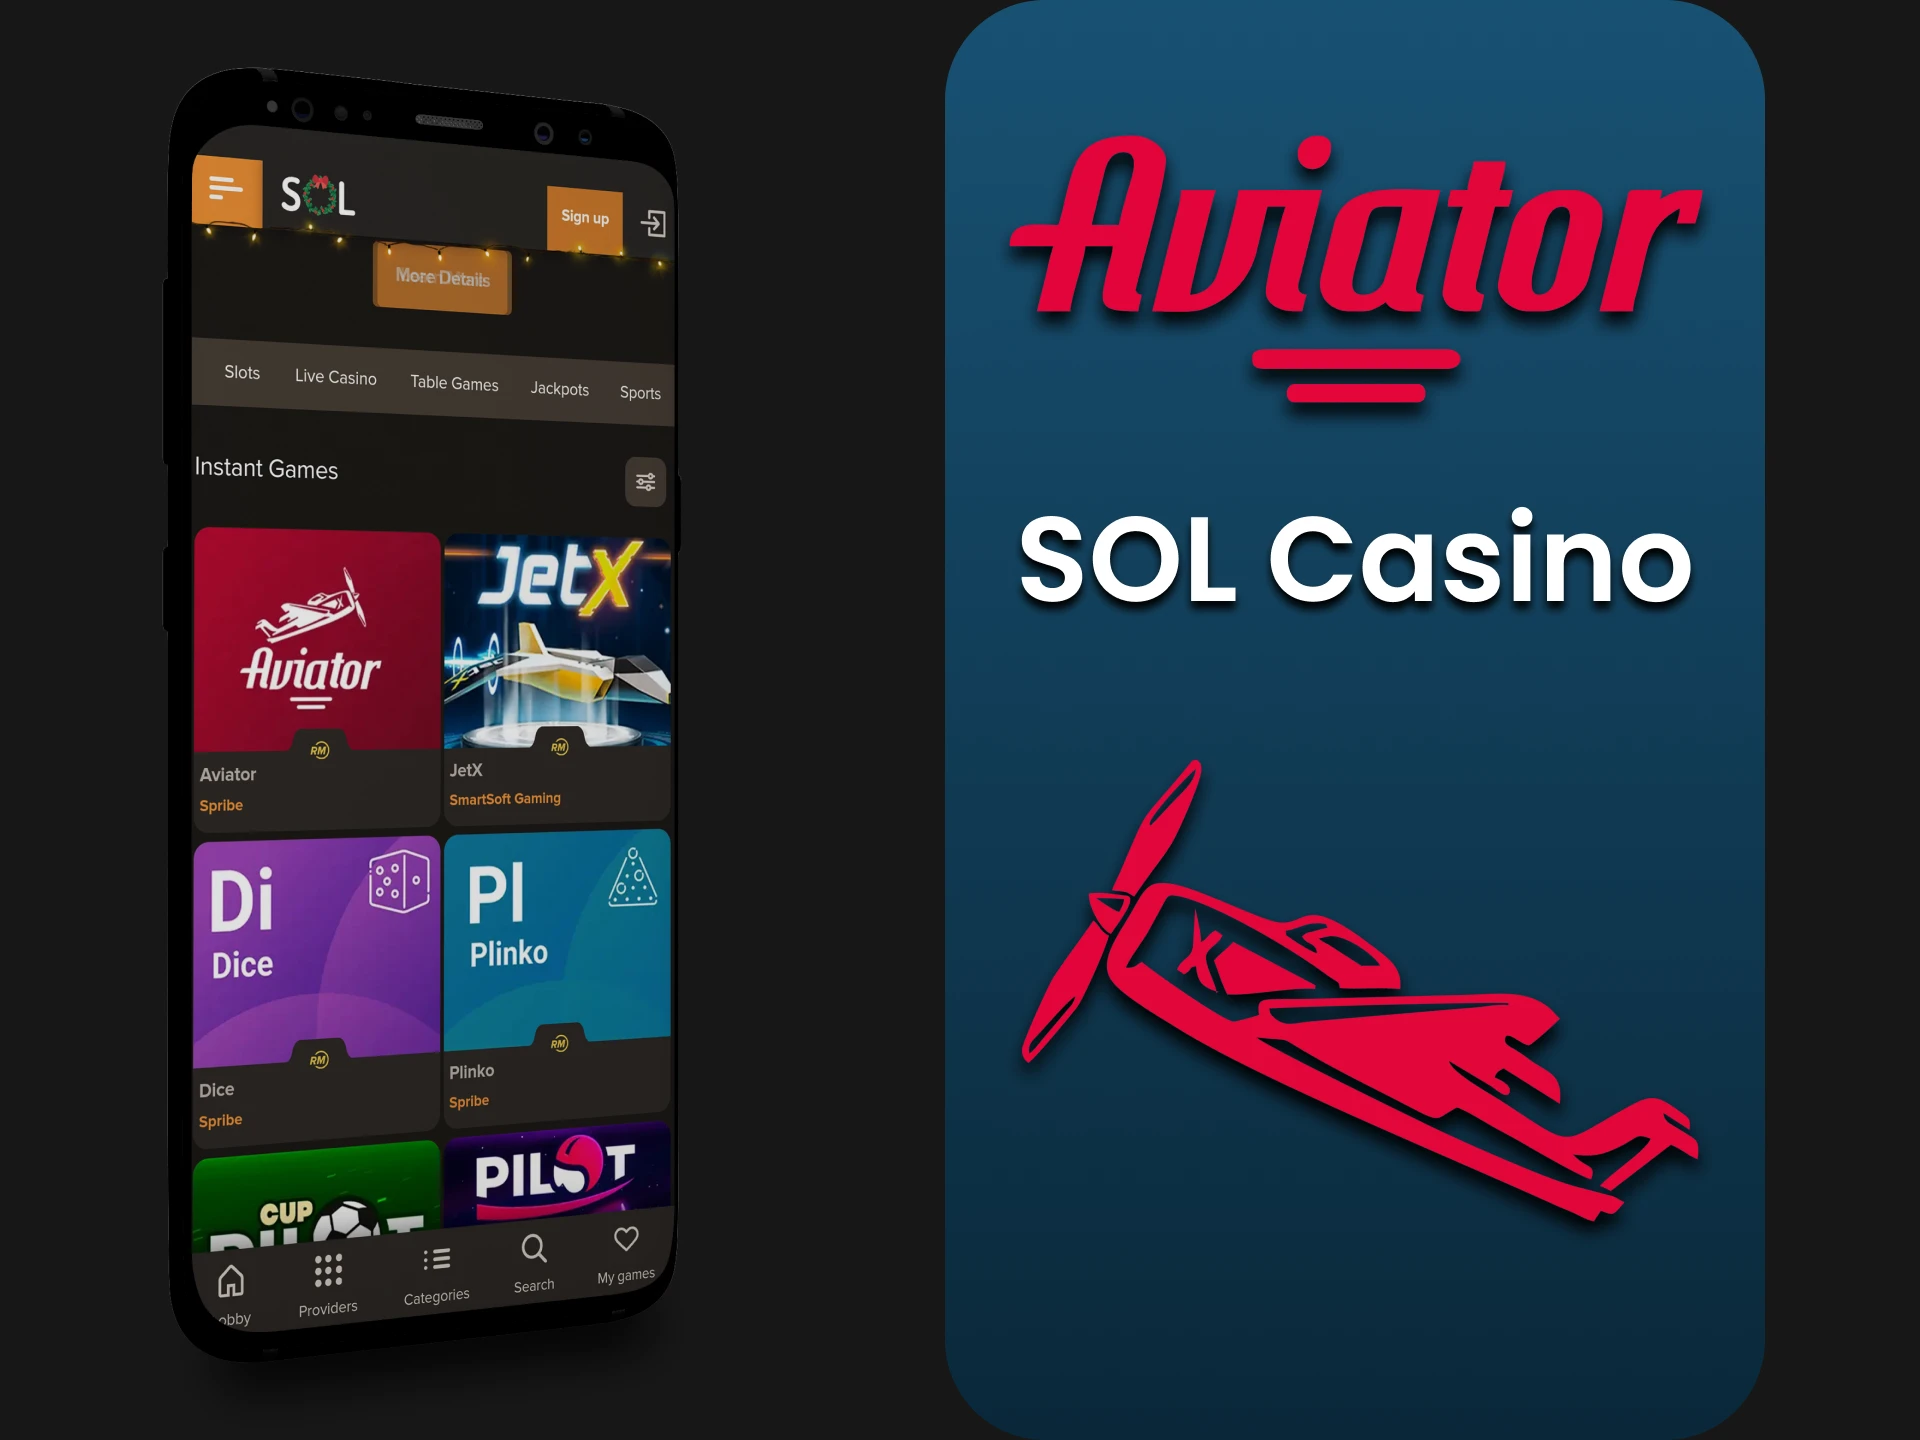 To play Aviator, choose the SOL app.